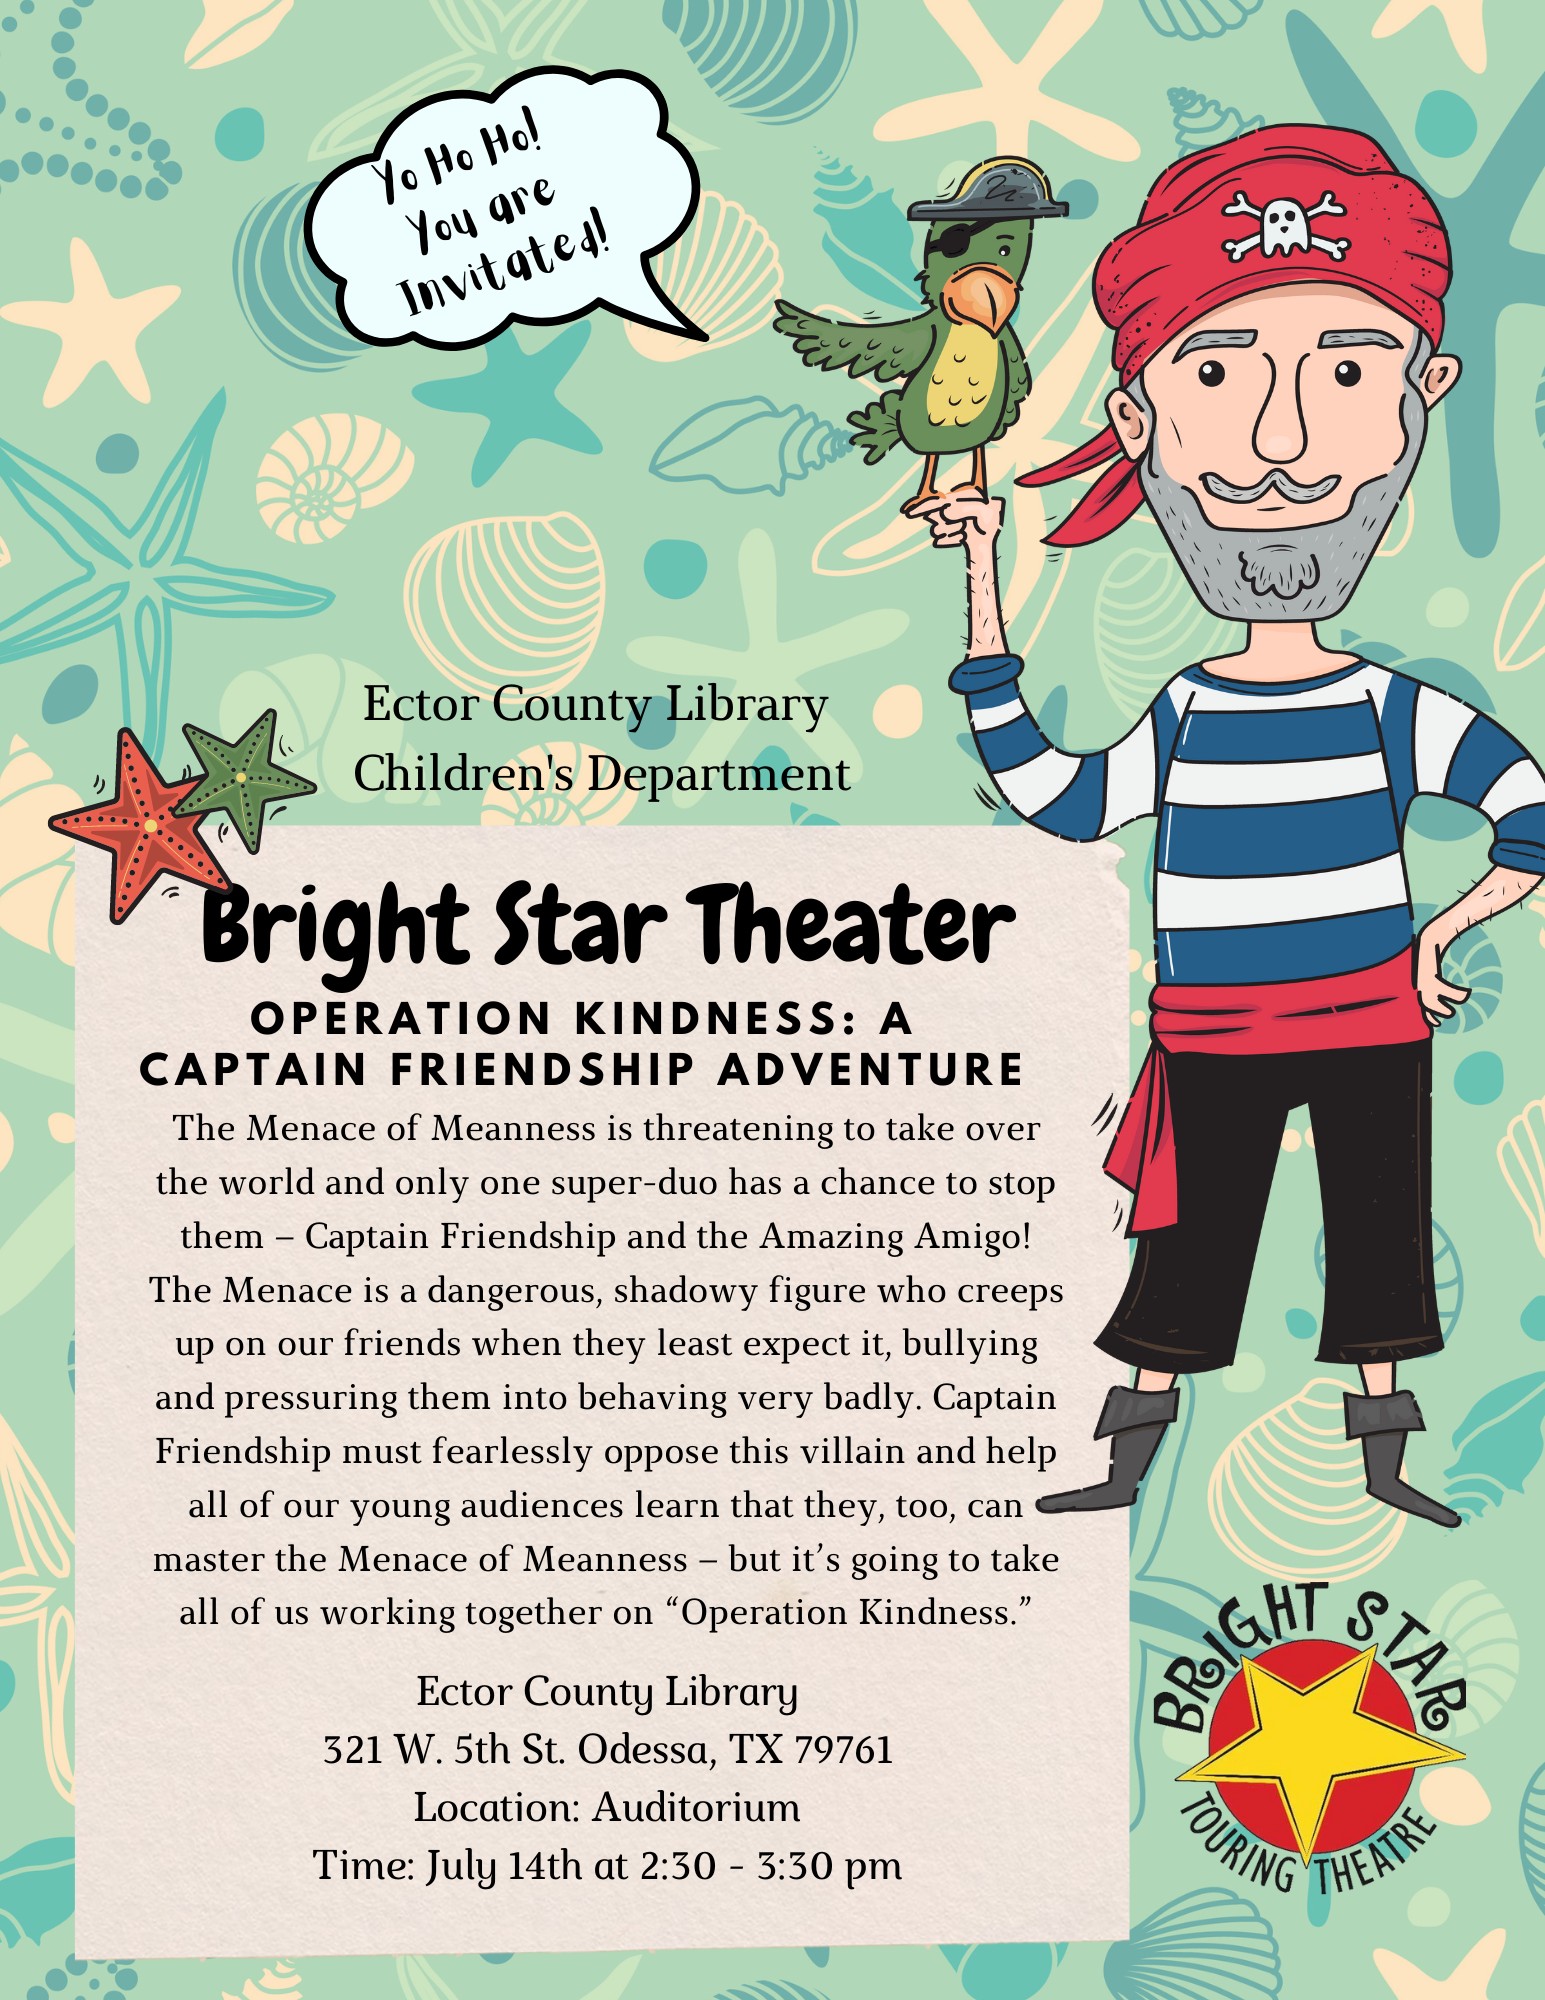 Bright Star Theater Kids Activity at the Ector County Library in Odessa, TX